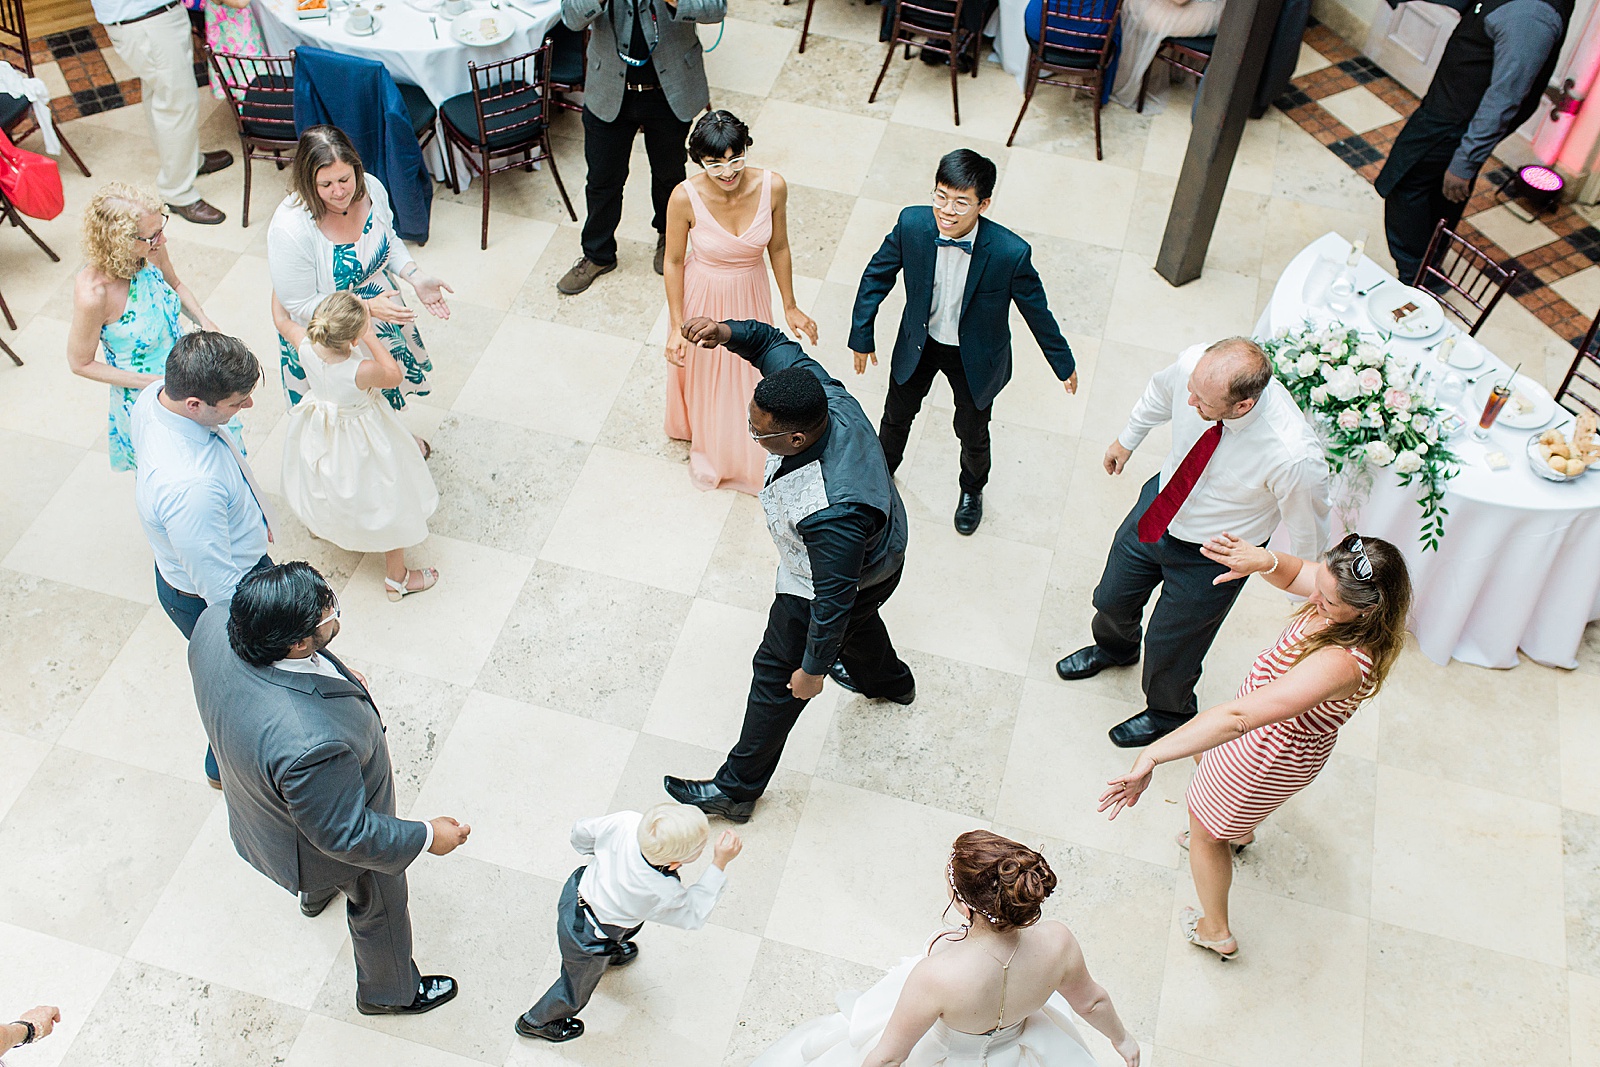 Guests Dancing at Reception at The Addison designed by NYC Wedding Planner, Poppy + Lynn